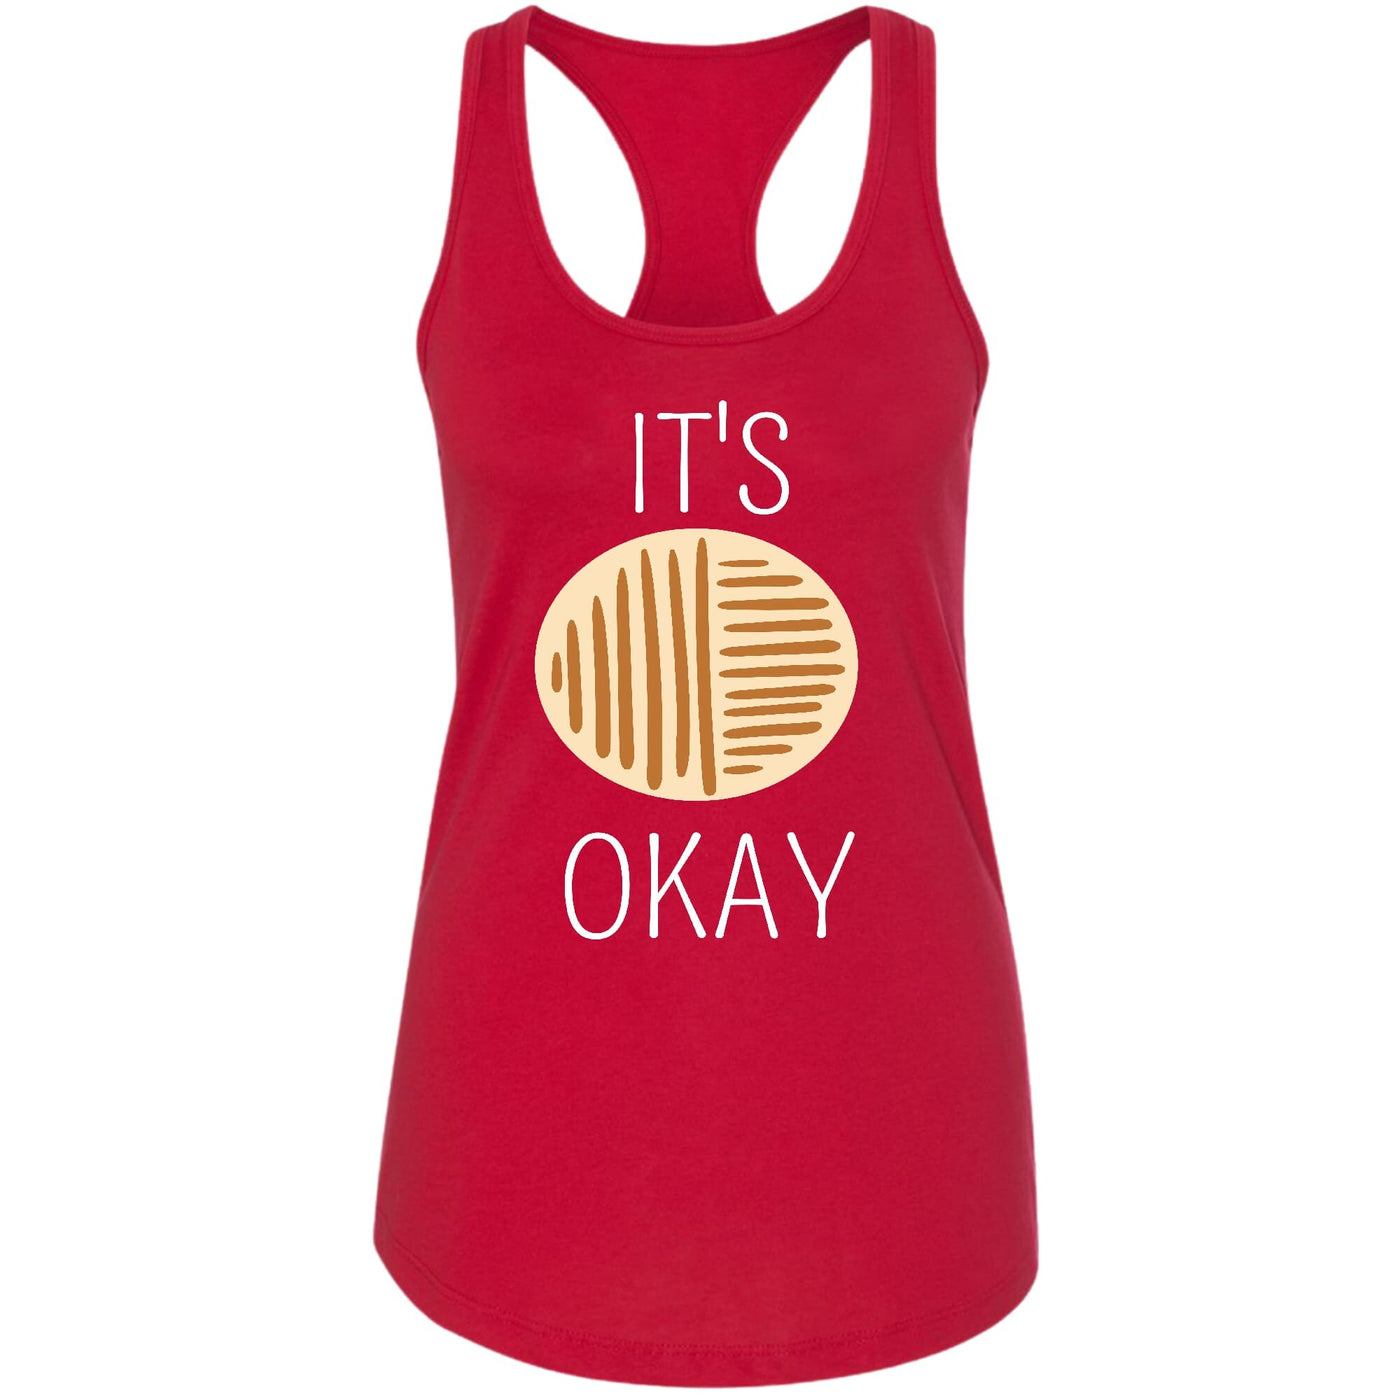 Womens Tank Top Fitness Shirt Say It Soul Its Okay White And Brown - Womens